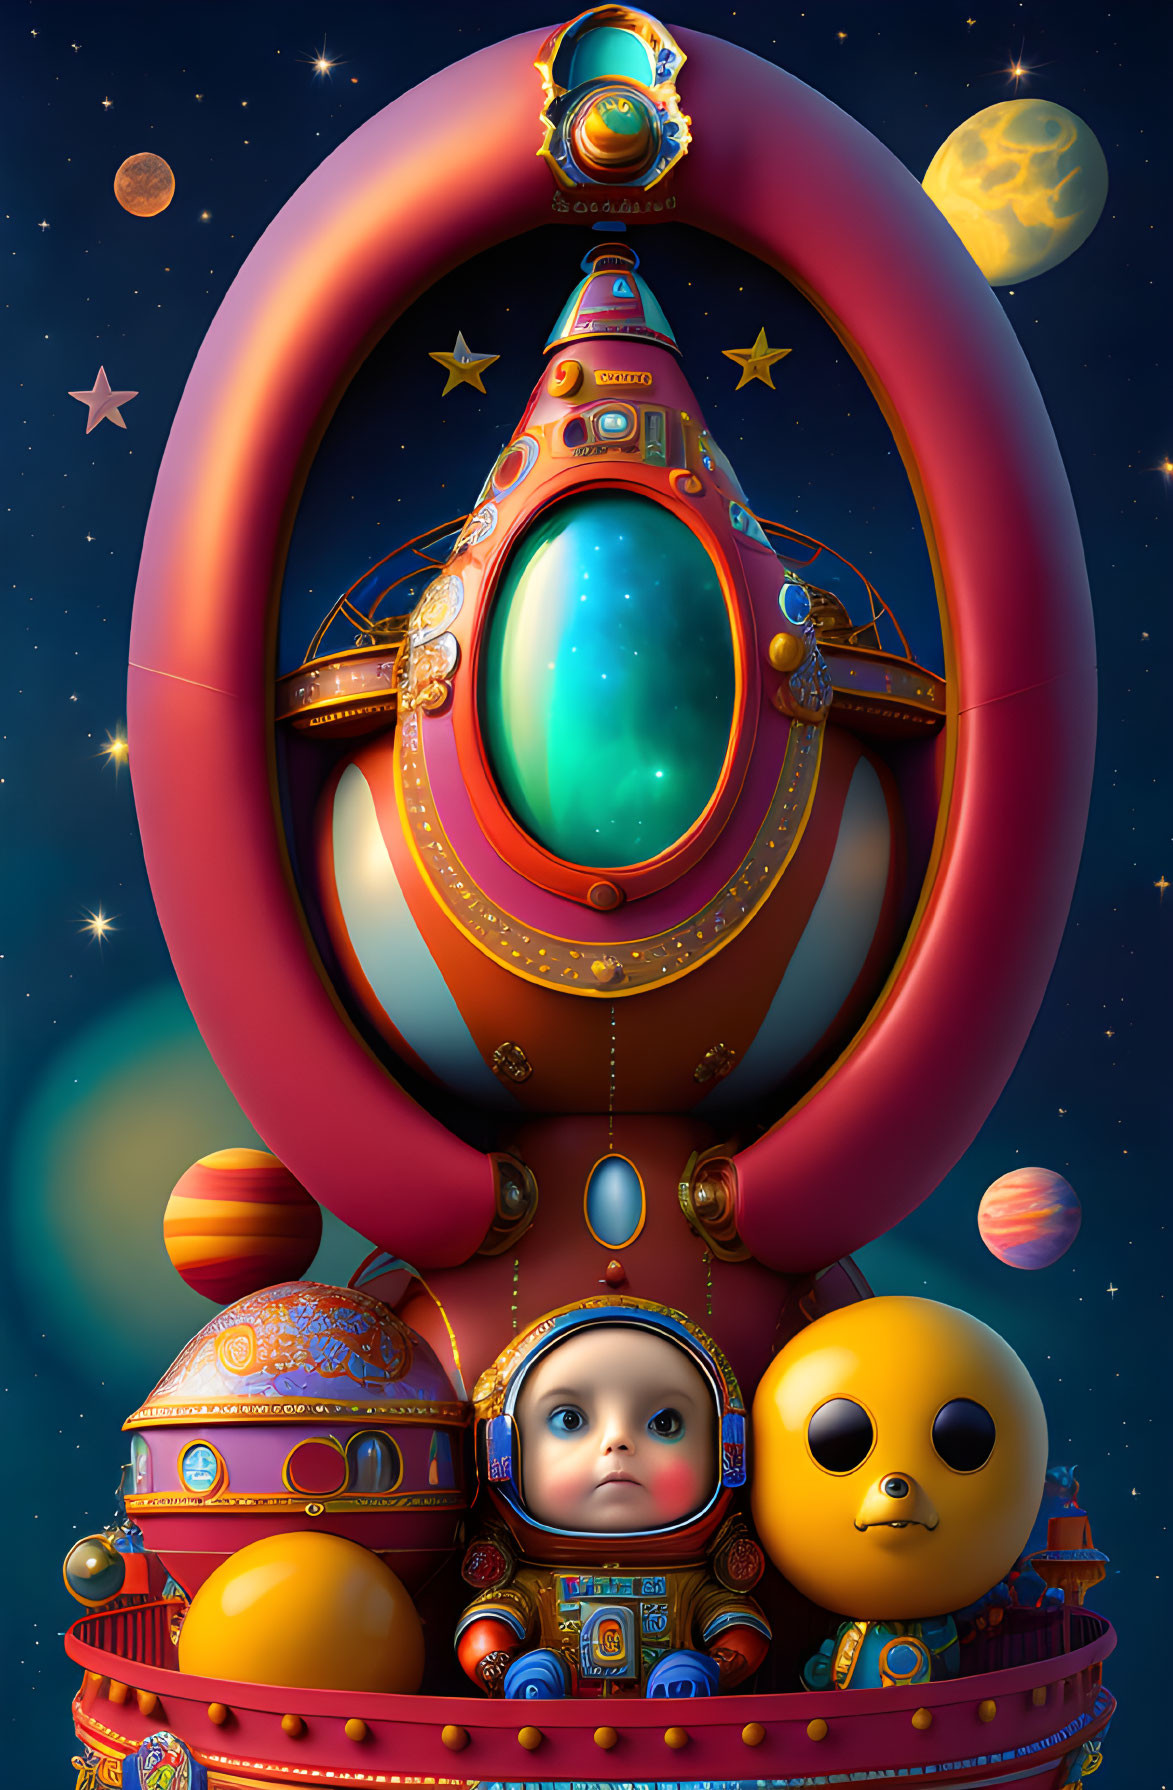 Colorful digital artwork of child in ornate spacesuit among celestial bodies